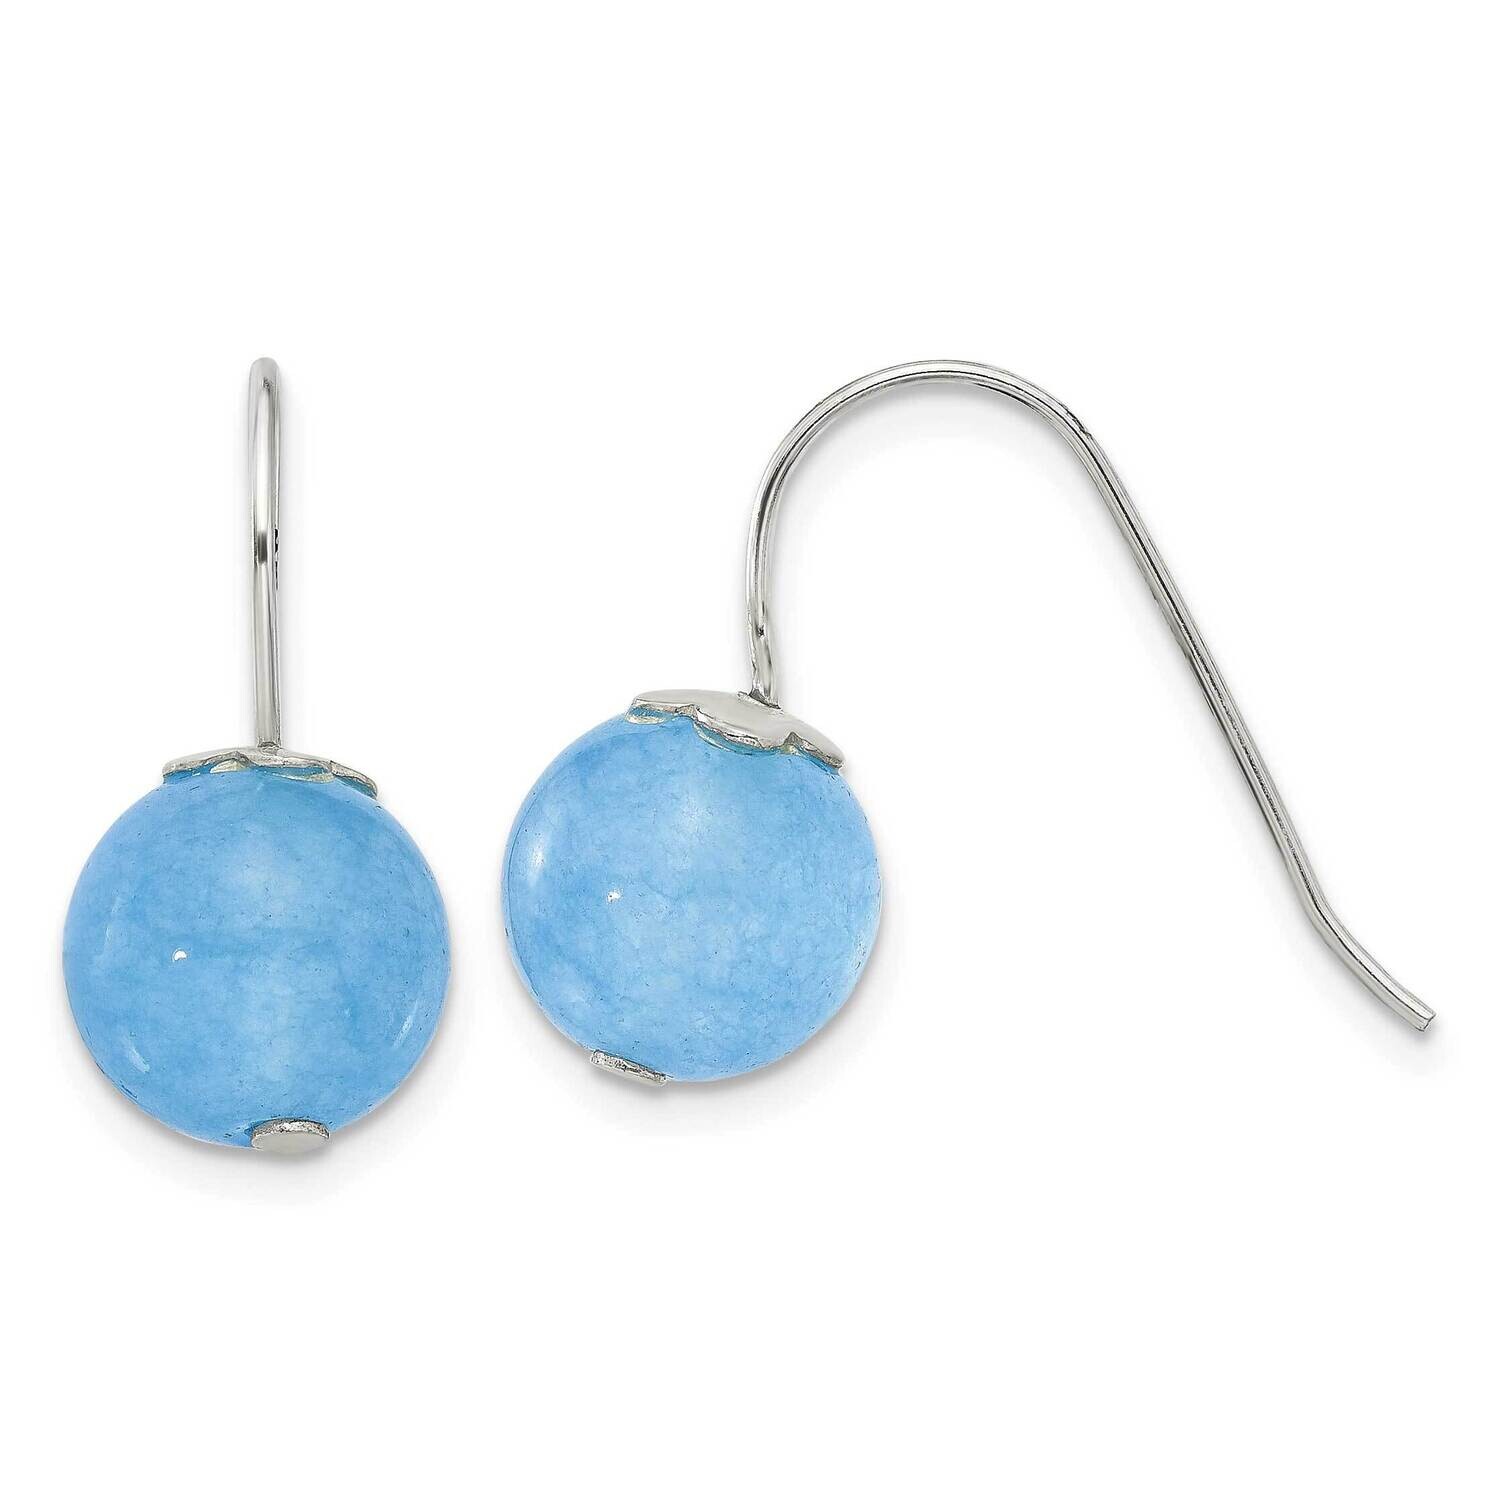 10mm Round Blue Aventurine Dangle Earrings Sterling Silver Polished QE17374